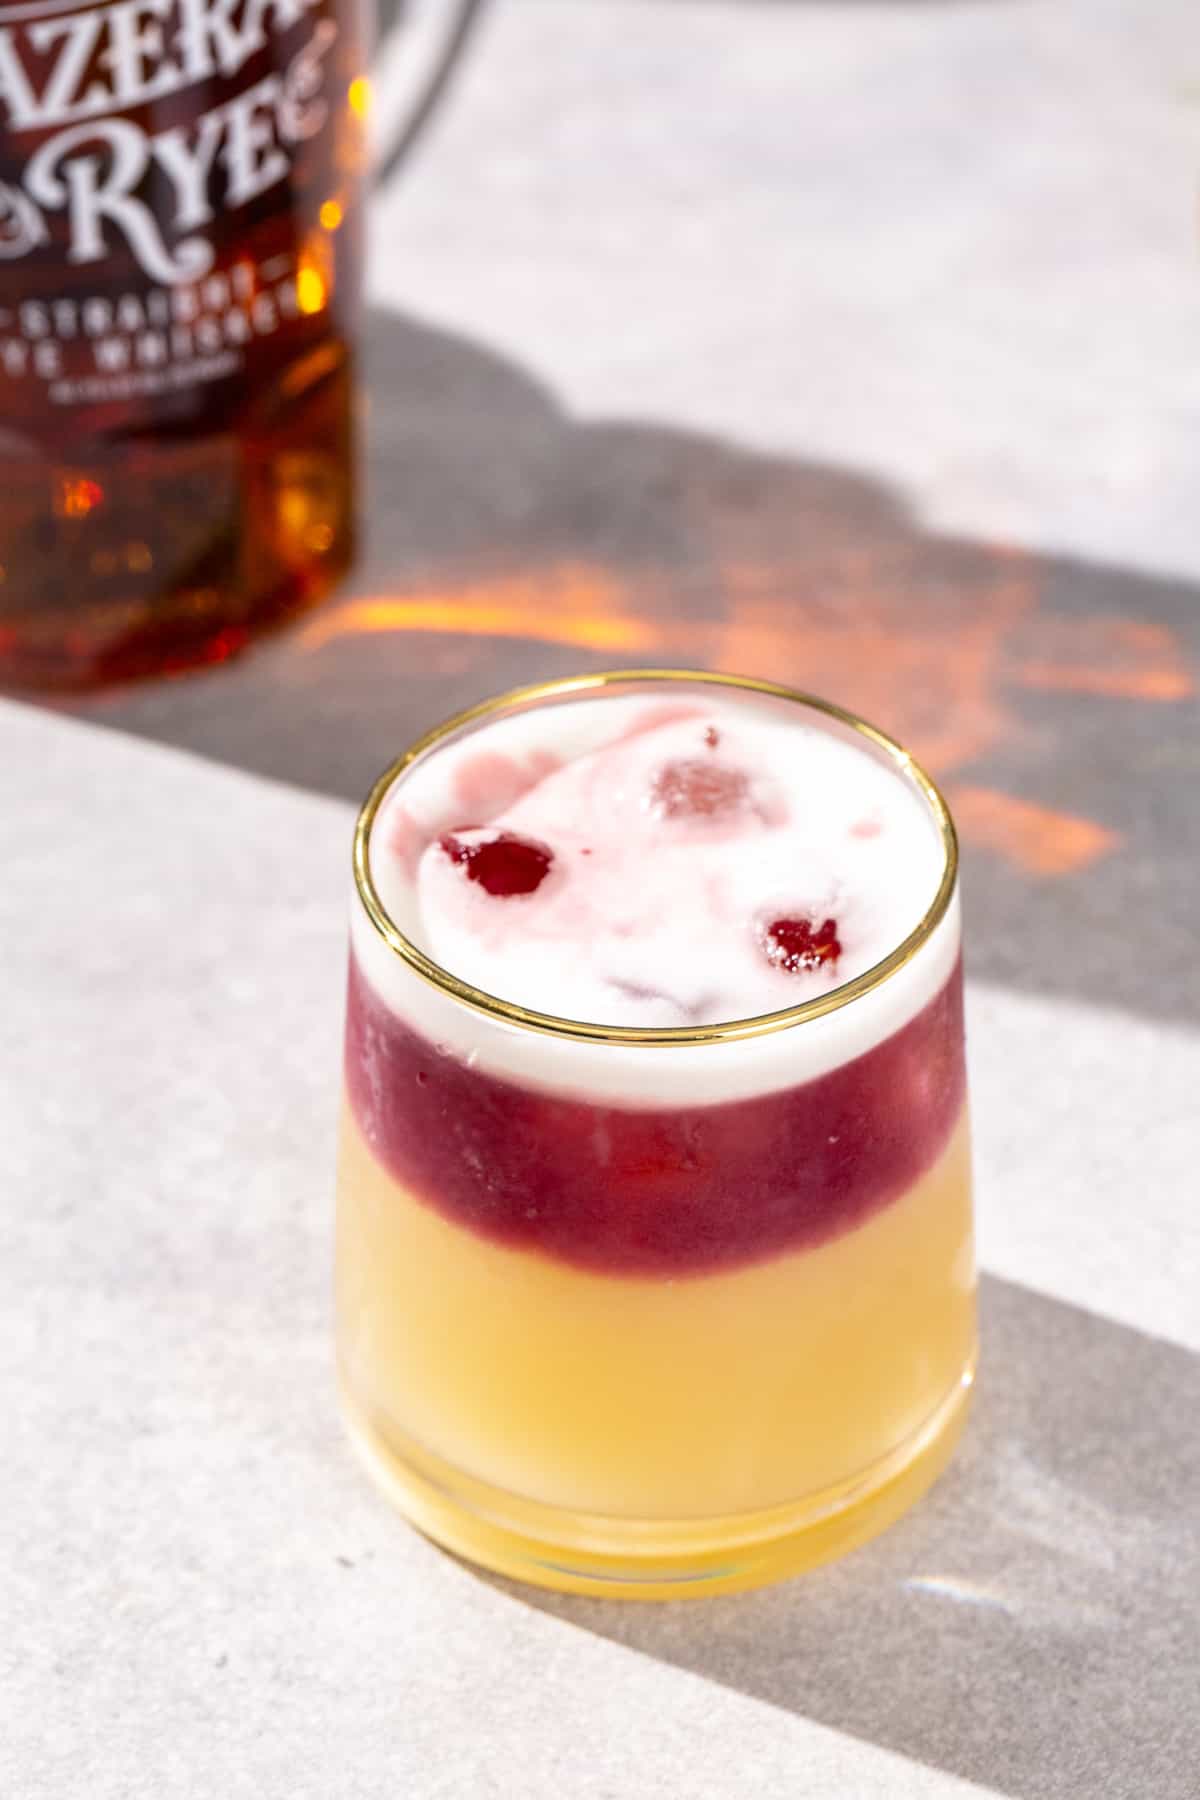 Overhead view of a New York Sour cocktail with a red wine float and egg white foam on top. A bottle of rye whiskey is in the background.